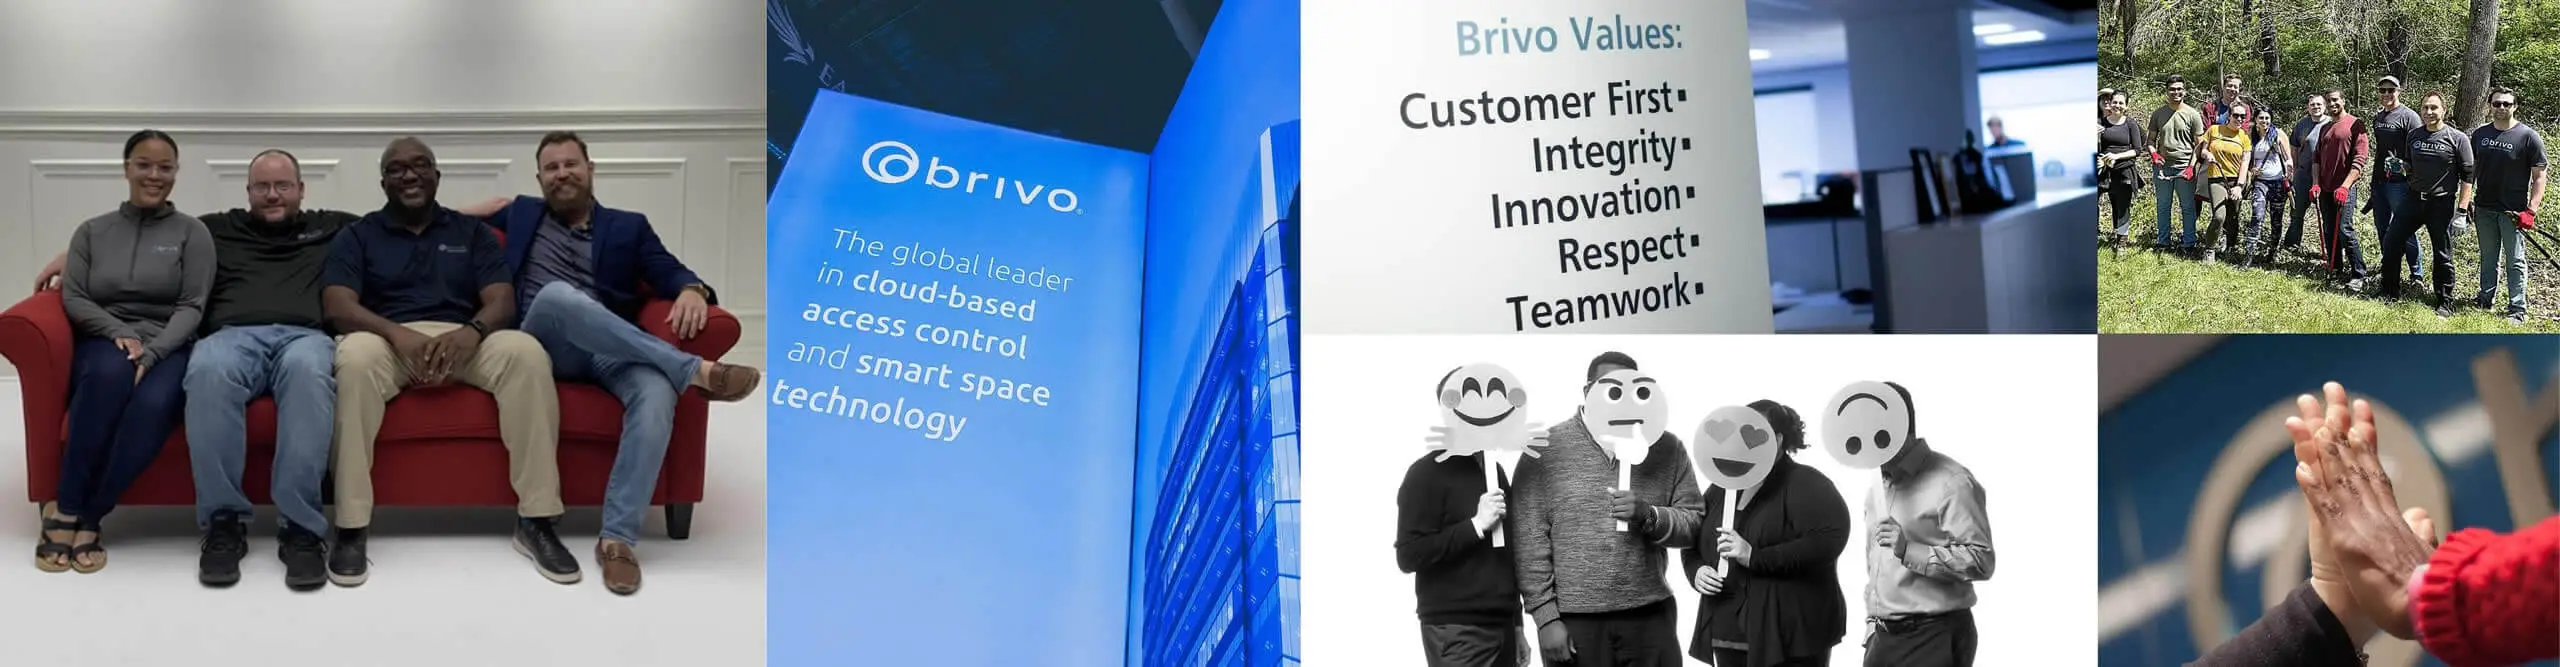 Brivo is a great place to work